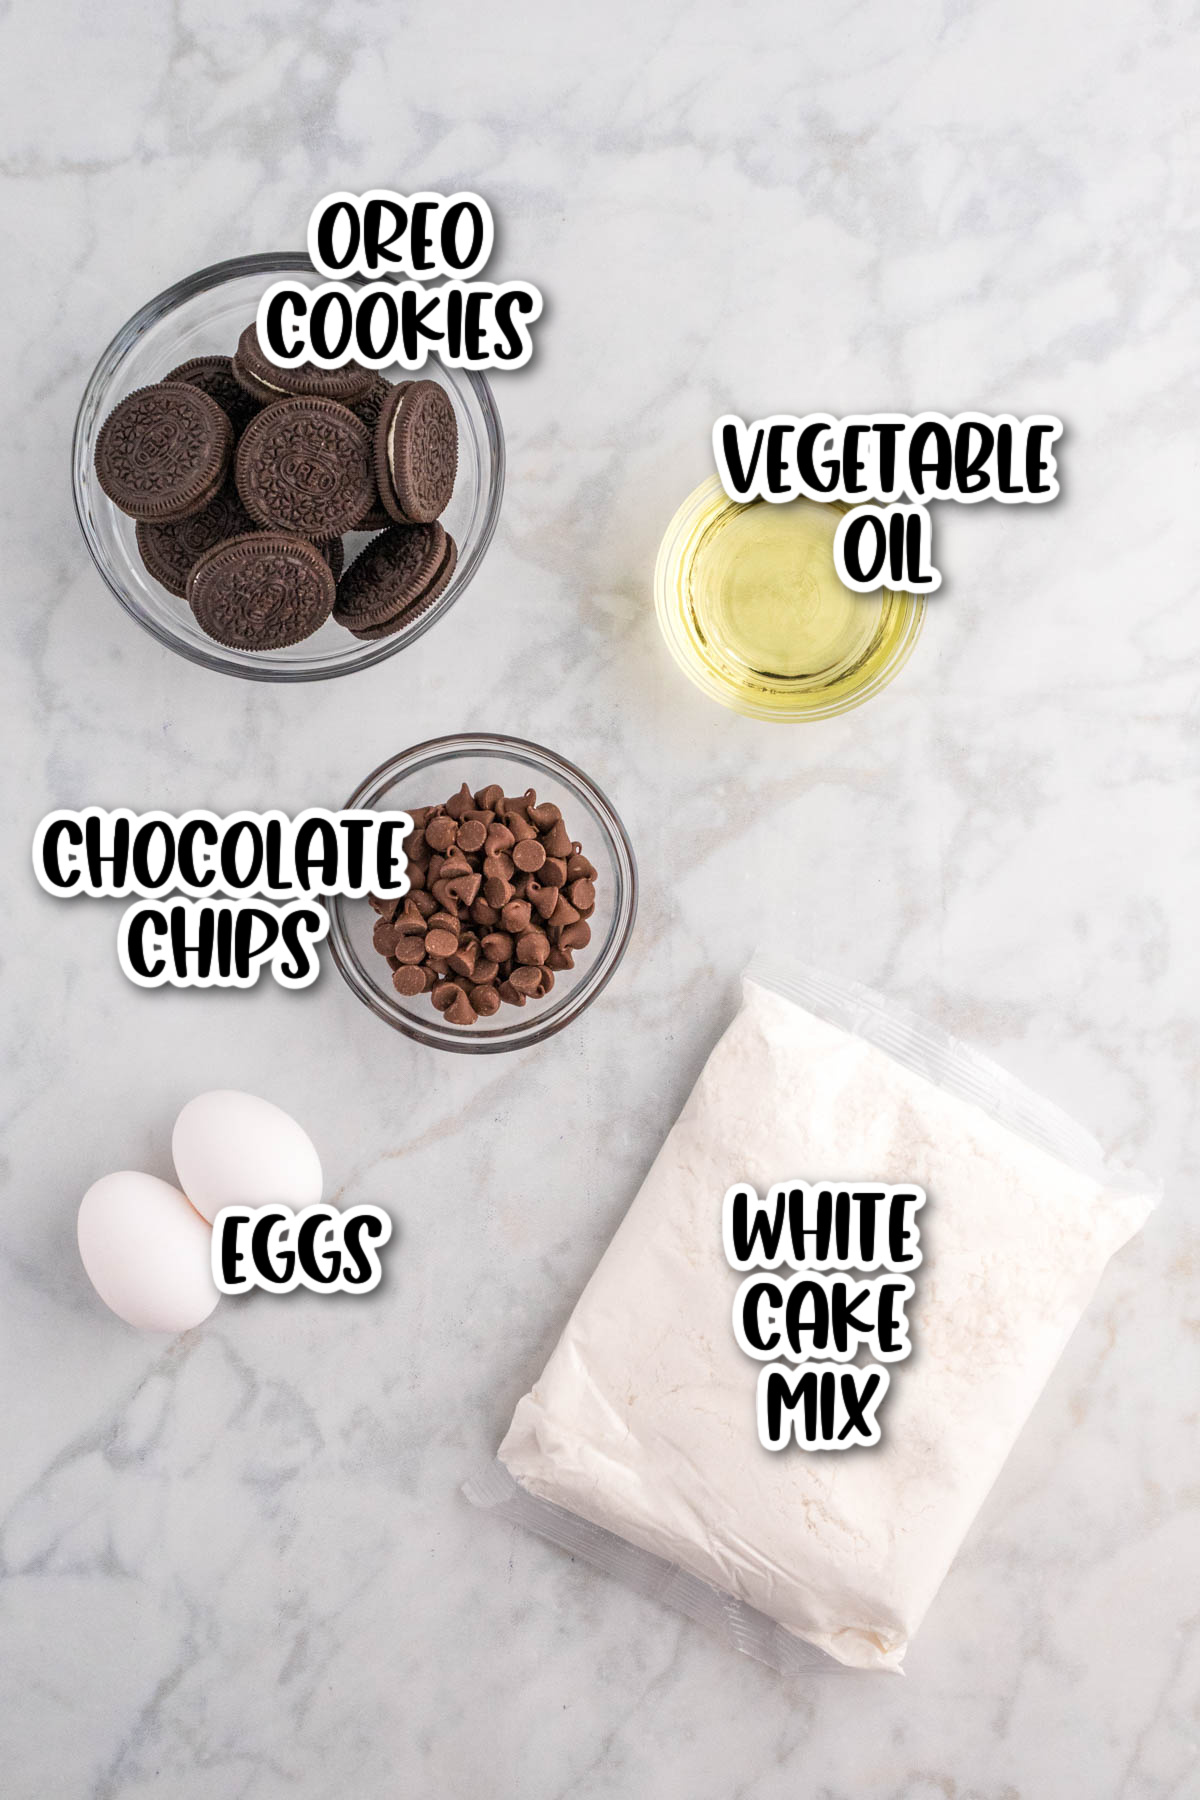 Ingredients for baking laid out on a marble surface, labeled: oreo cookies, vegetable oil, chocolate chips, eggs, and white cake mix.